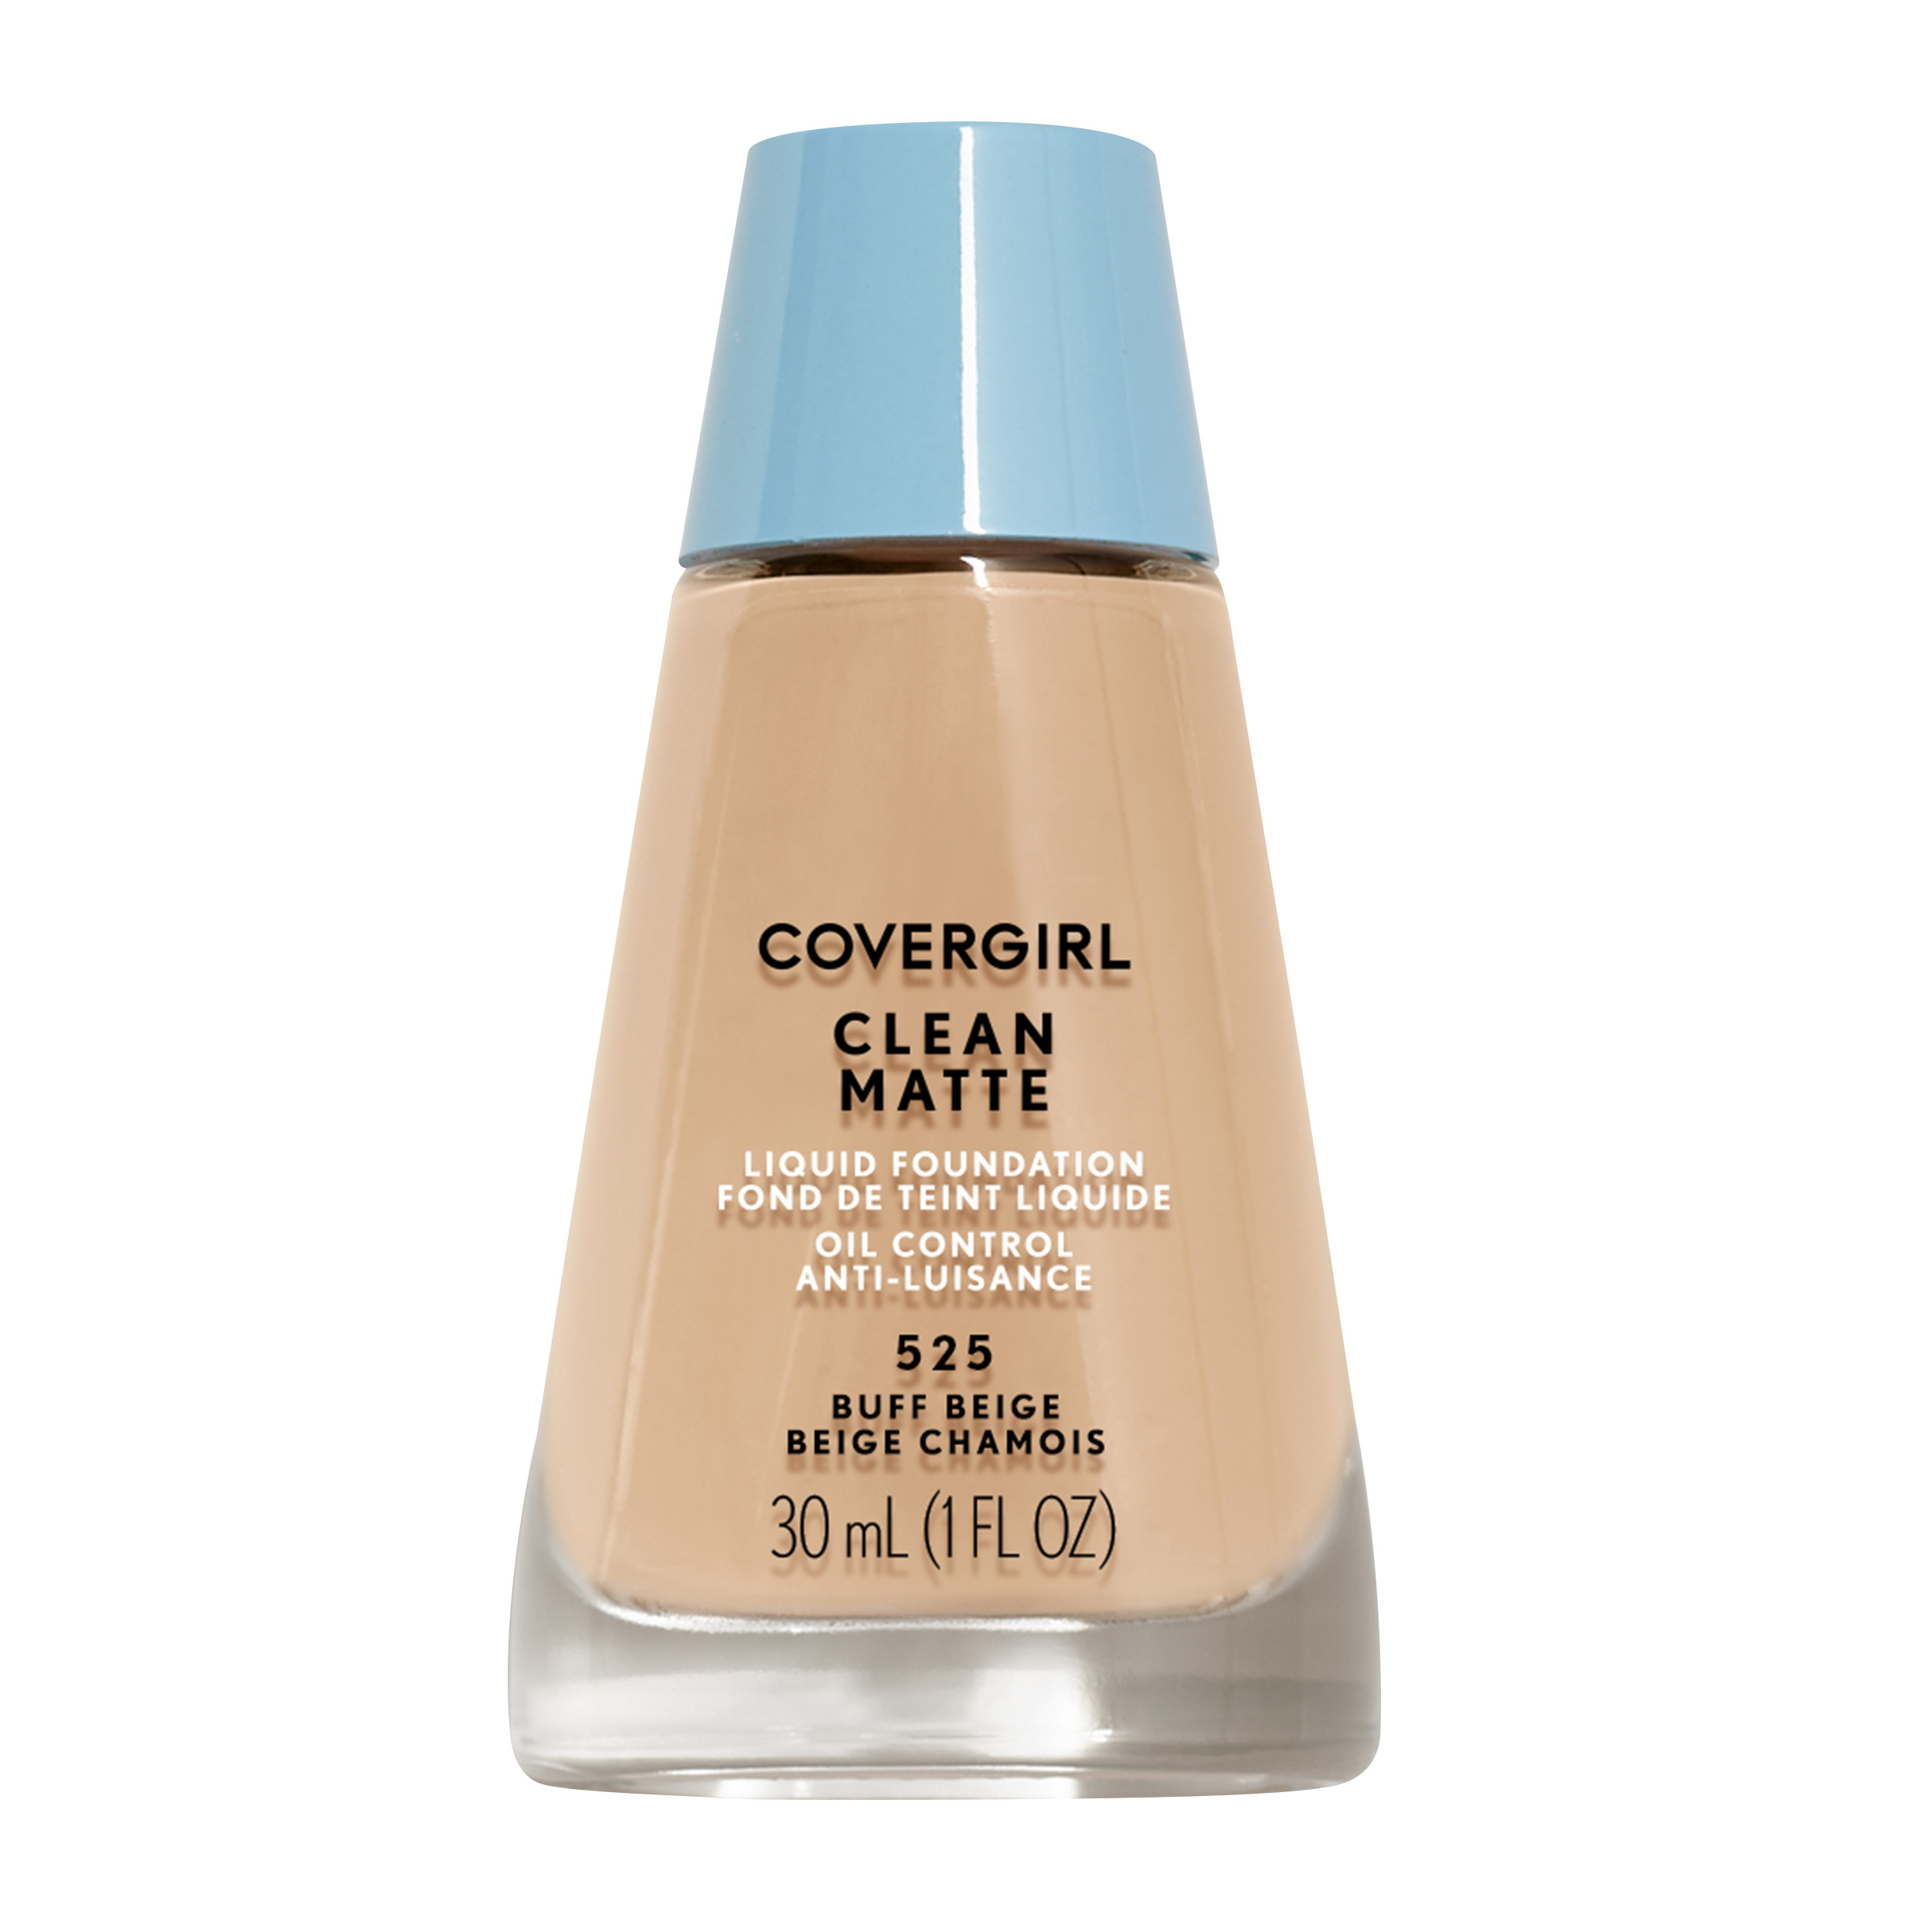 COVERGIRL Clean Matte Liquid Foundation, 525 Buff Beige, 1 fl oz, Liquid Foundation, Matte Foundation, Lightweight Foundation, Moisturizing Foundation, Water Based Foundation - image 1 of 8